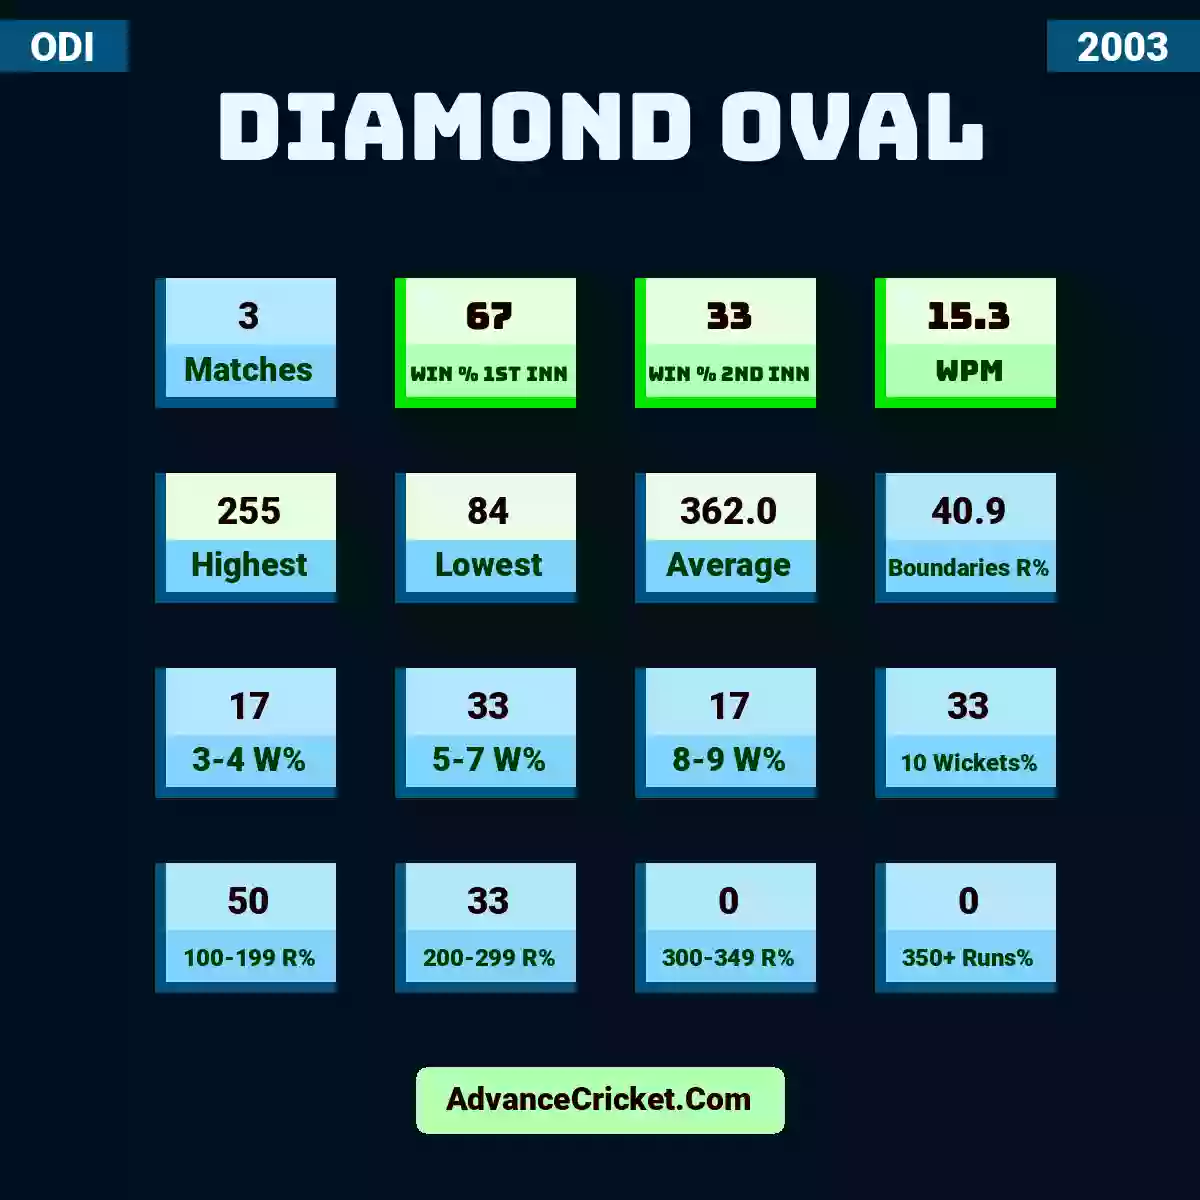 Image showing Diamond Oval with Matches: 3, Win % 1st Inn: 67, Win % 2nd Inn: 33, WPM: 15.3, Highest: 255, Lowest: 84, Average: 362.0, Boundaries R%: 40.9, 3-4 W%: 17, 5-7 W%: 33, 8-9 W%: 17, 10 Wickets%: 33, 100-199 R%: 50, 200-299 R%: 33, 300-349 R%: 0, 350+ Runs%: 0.